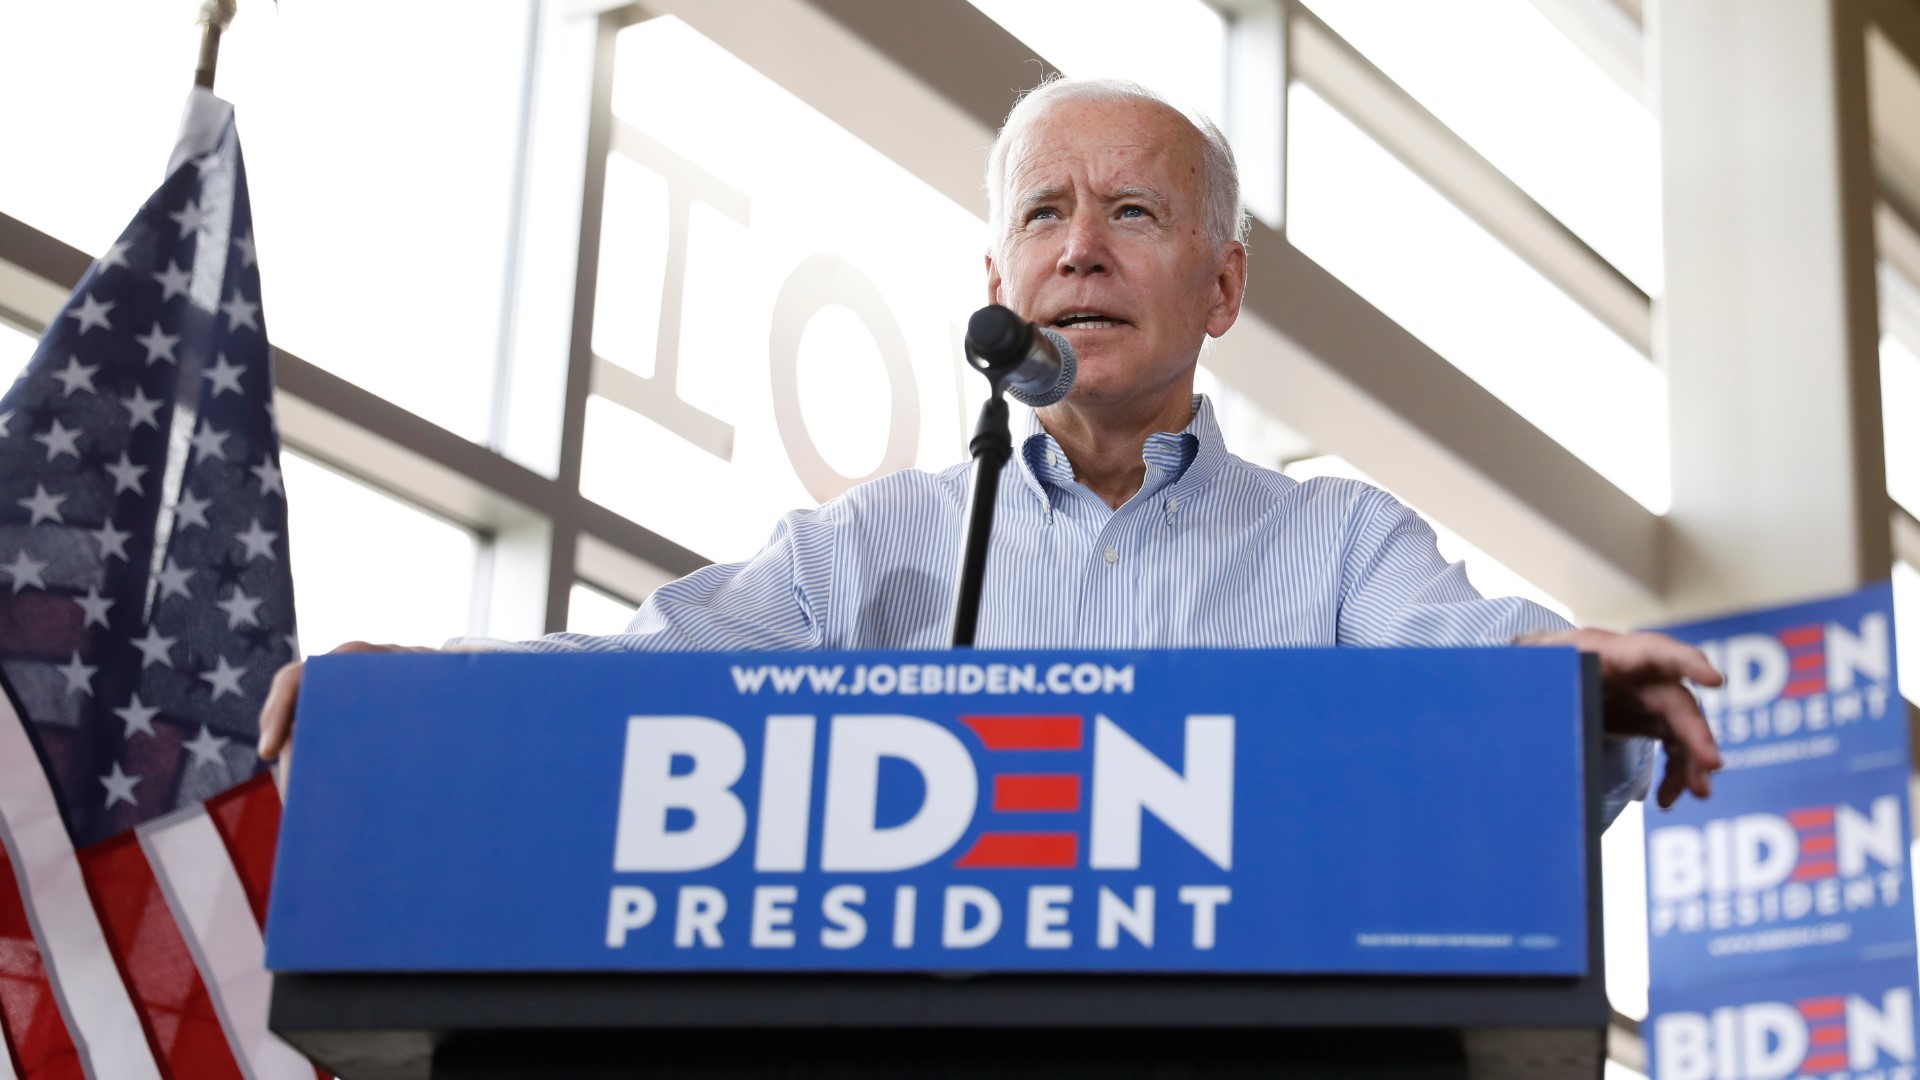 Joe Biden says we'll cure cancer if he's elected president. The former vice president made the remark Tuesday during a campaign stop in Ottumwa, Iowa. Biden lost his son, Beau, to brain cancer in 2015.